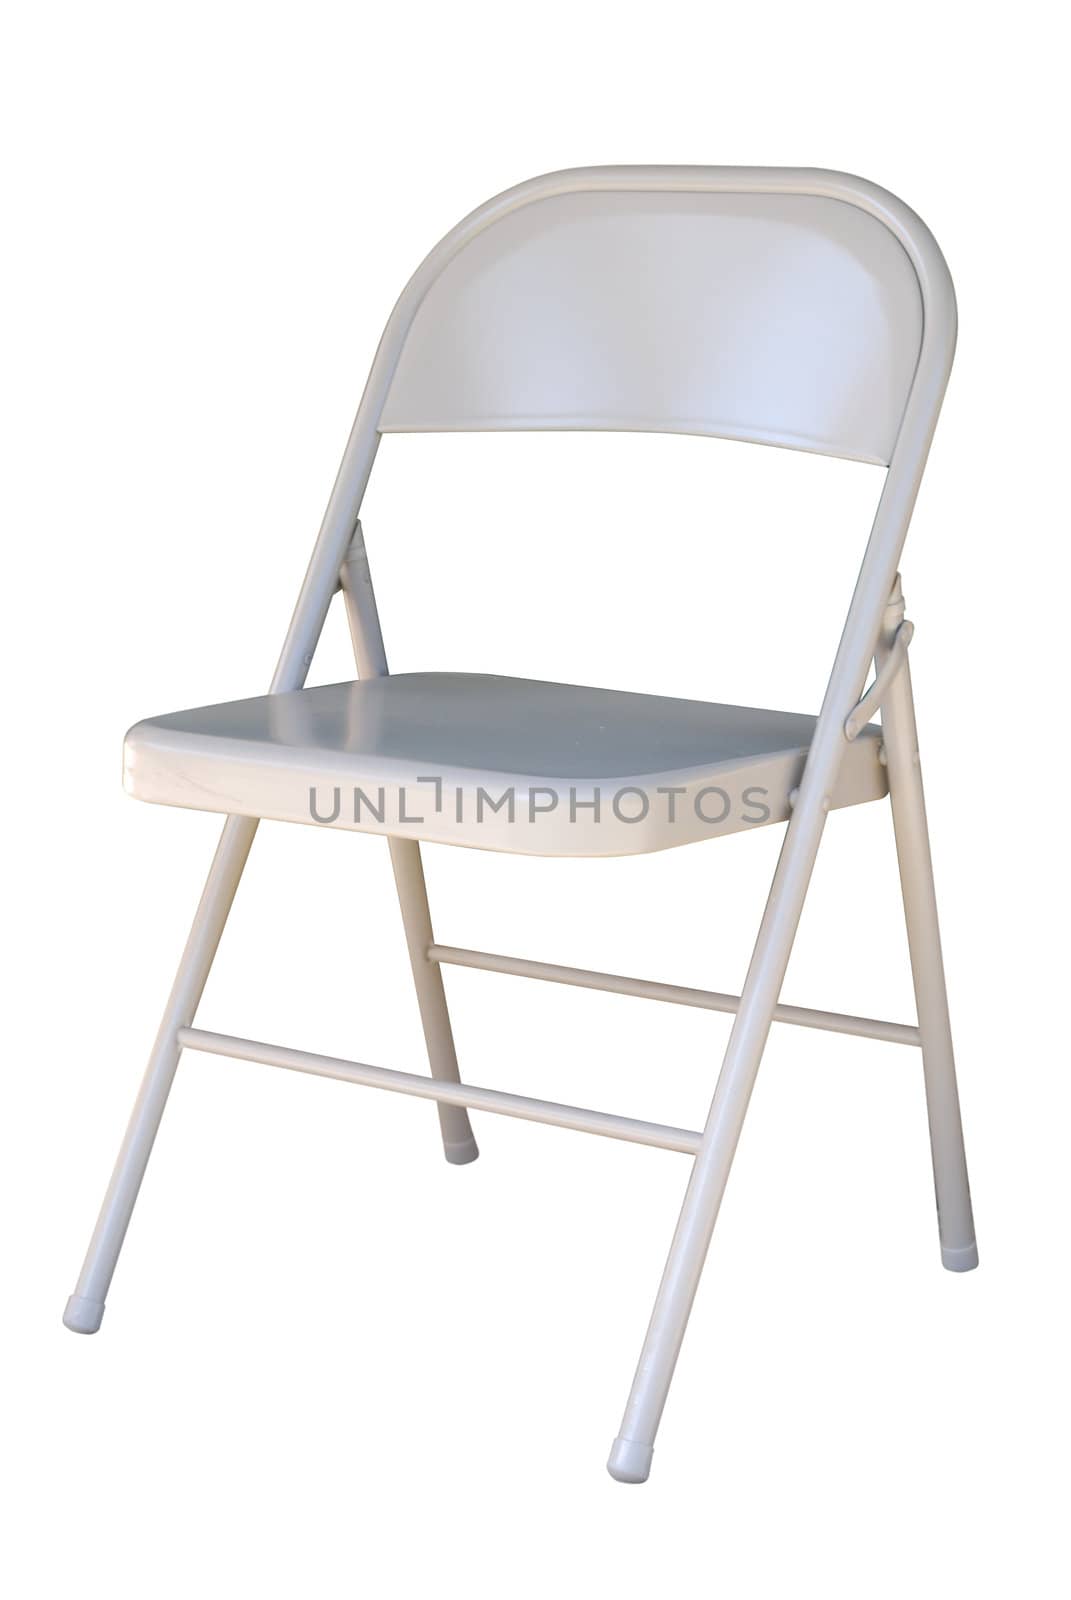 Metal folding chair isolated on white background with clipping path.